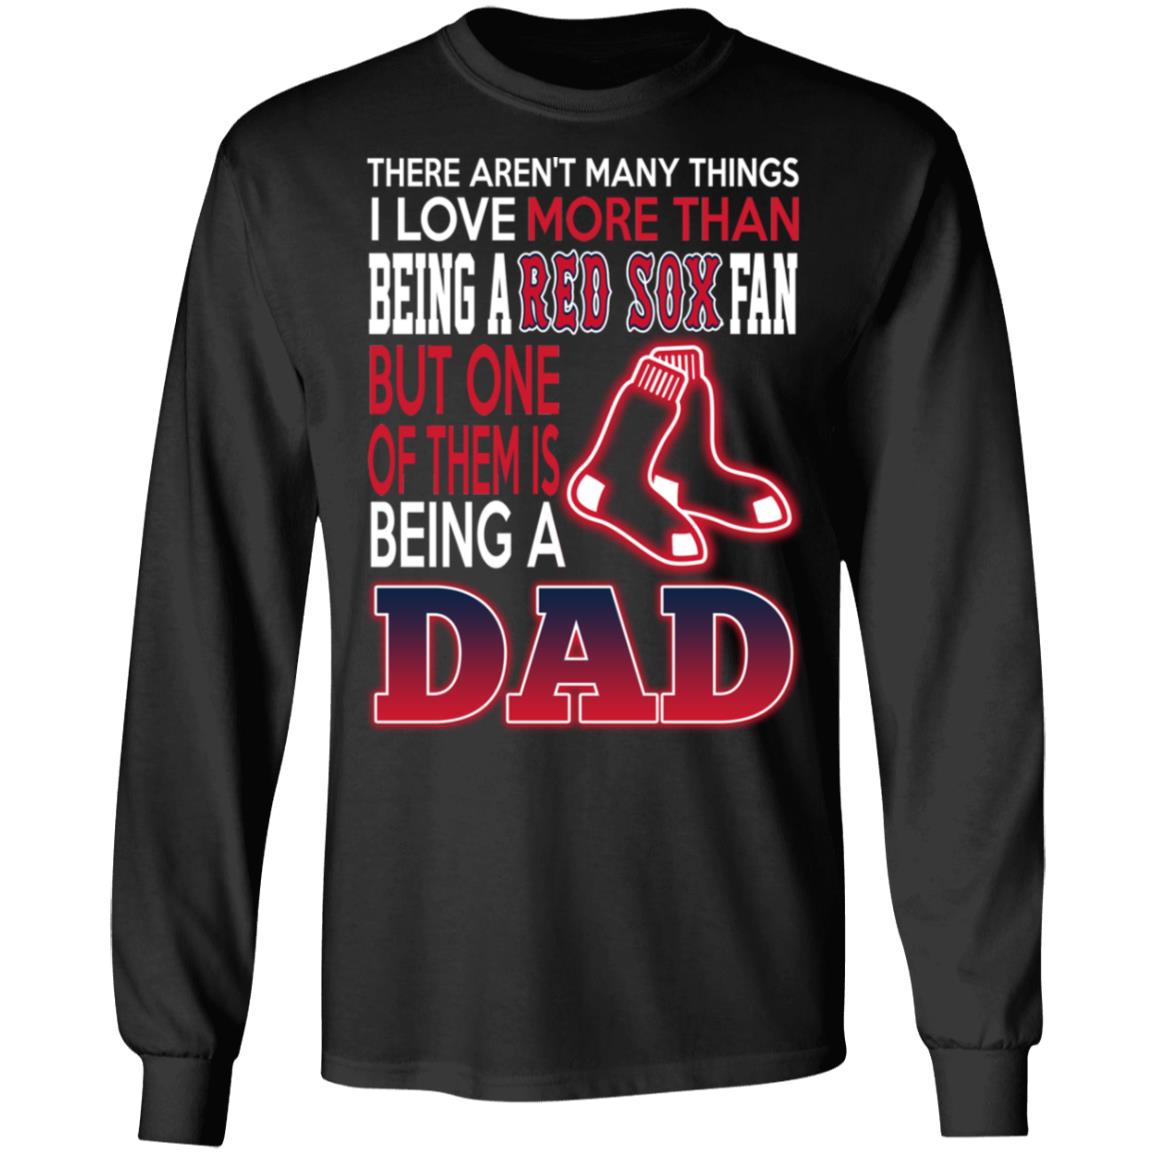 Boston Red Sox Dad T-Shirts Love Being A Red Sox Fan But One Is Being A Dad  Shirt